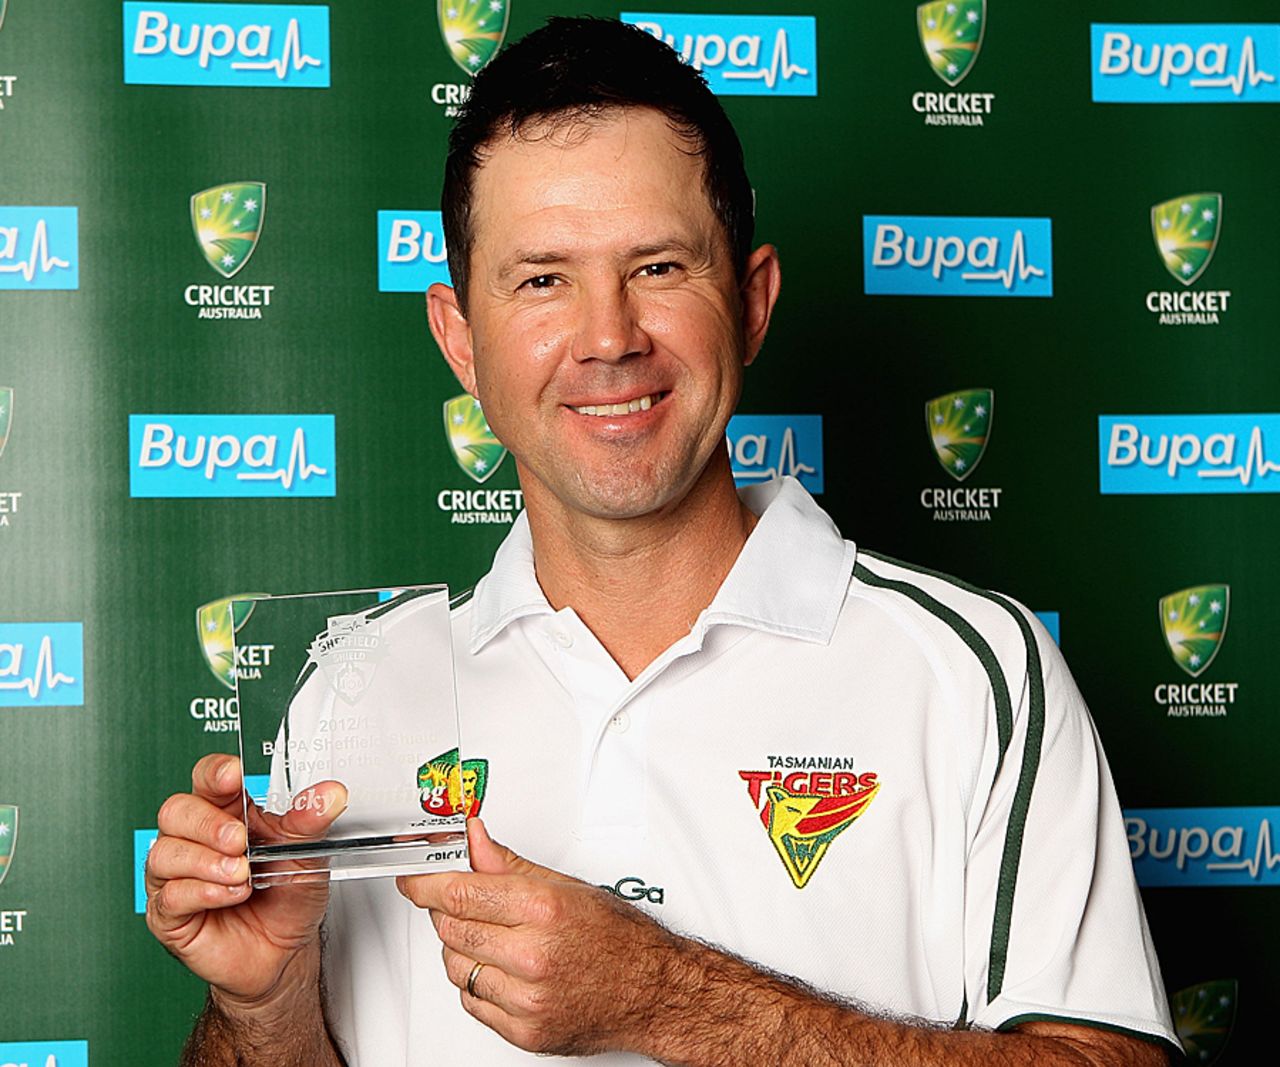 Ricky Ponting with the Sheffield Shield player of the year award, Hobart, March 20, 2013